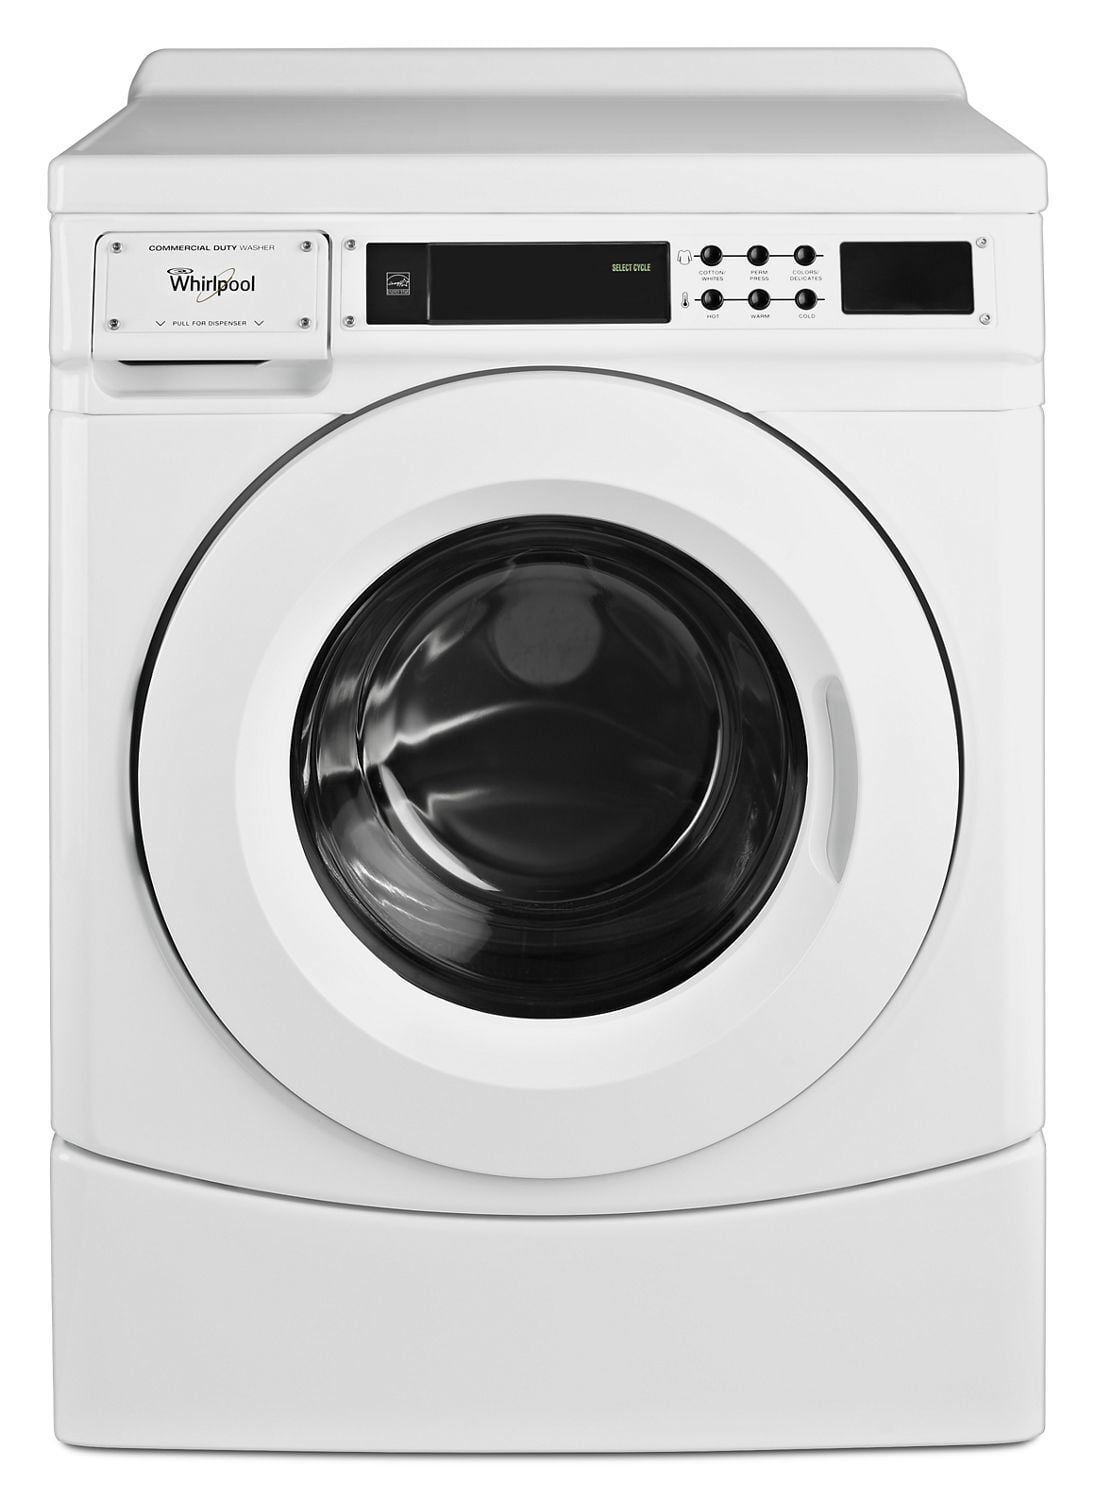 Whirlpool CHW9160GW 27" Commercial High-Efficiency Energy Star-Qualified Front-Load Washer, Non-Vend White